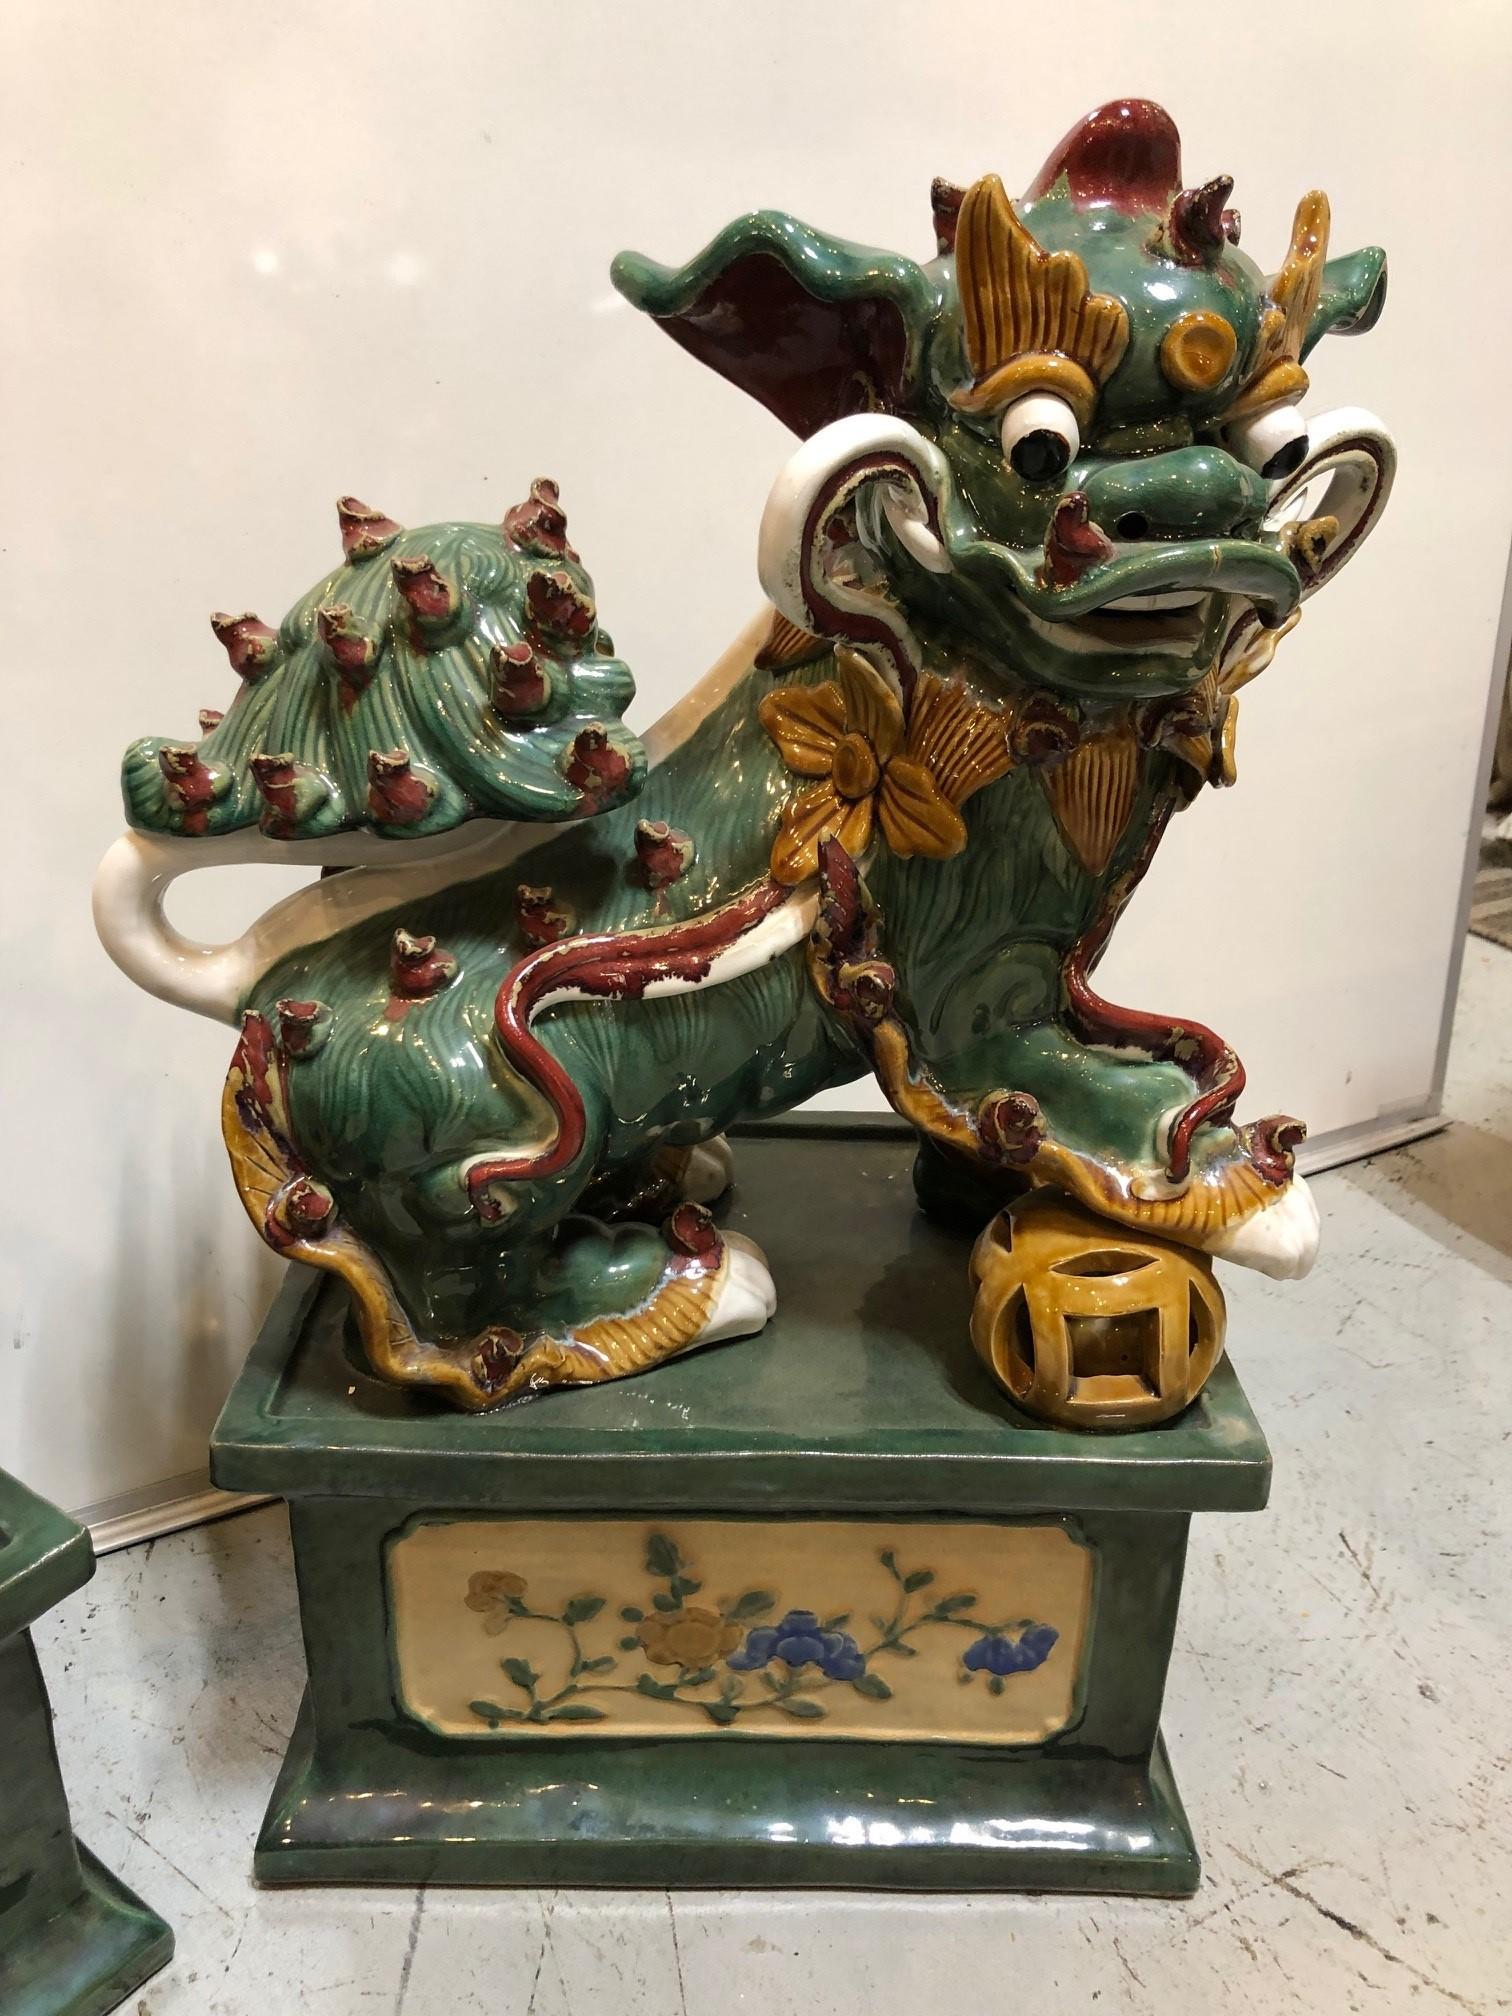 Pair of mid 20th century glazed terracotta foo dogs with a great colors. This is a good looking pair of Foo Dogs and a nice size for any room. Foo Dogs also known as Guardian Lions symbolize prosperity, success, and guardianship, placed at the